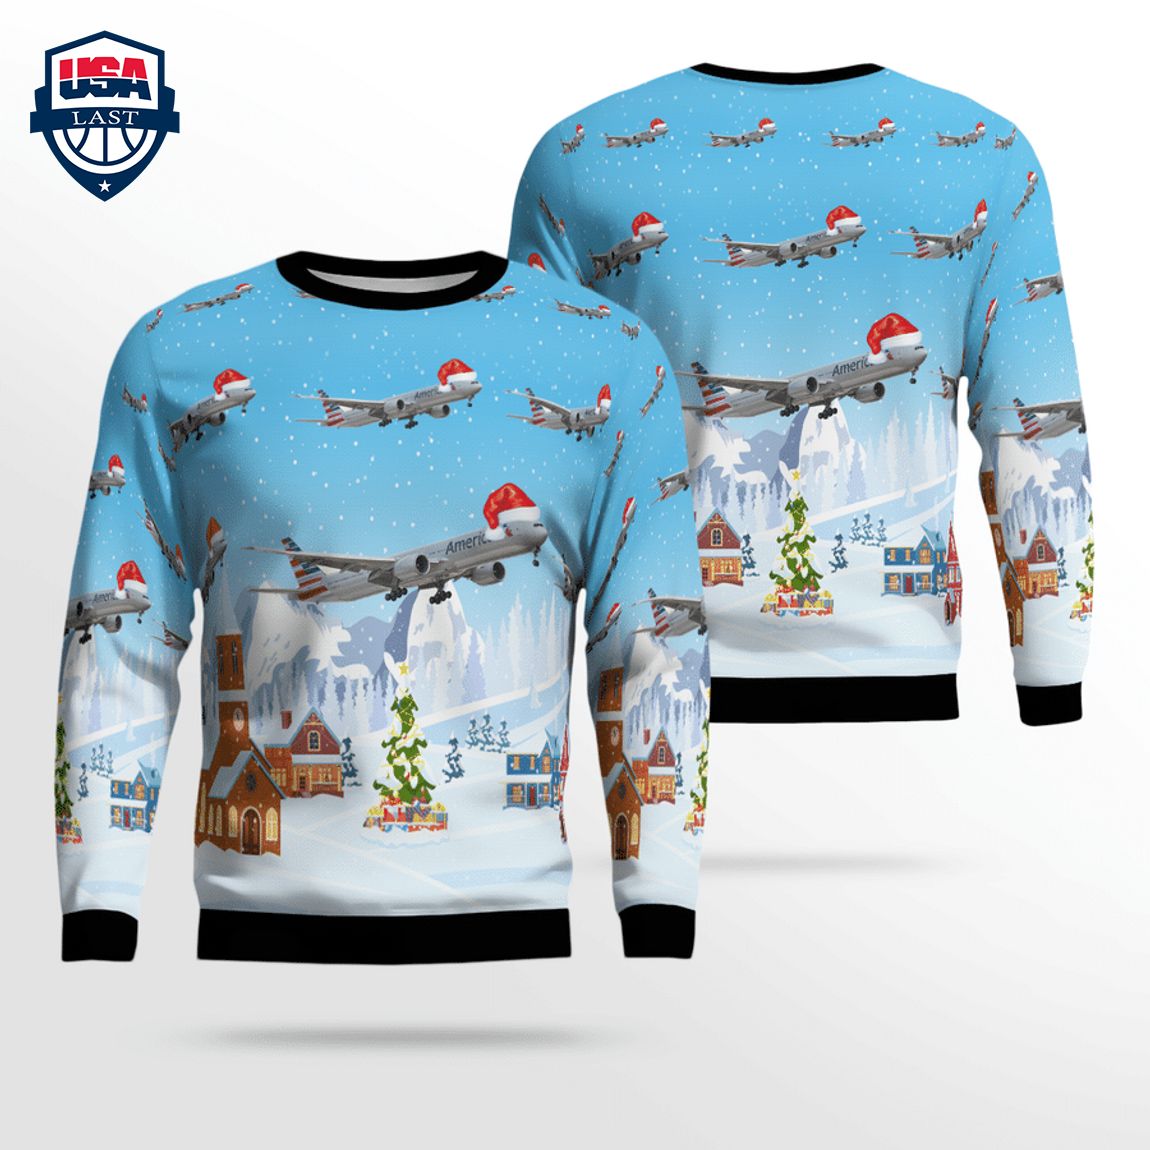 United Airlines Boeing 777-300ER 3D Christmas Sweater